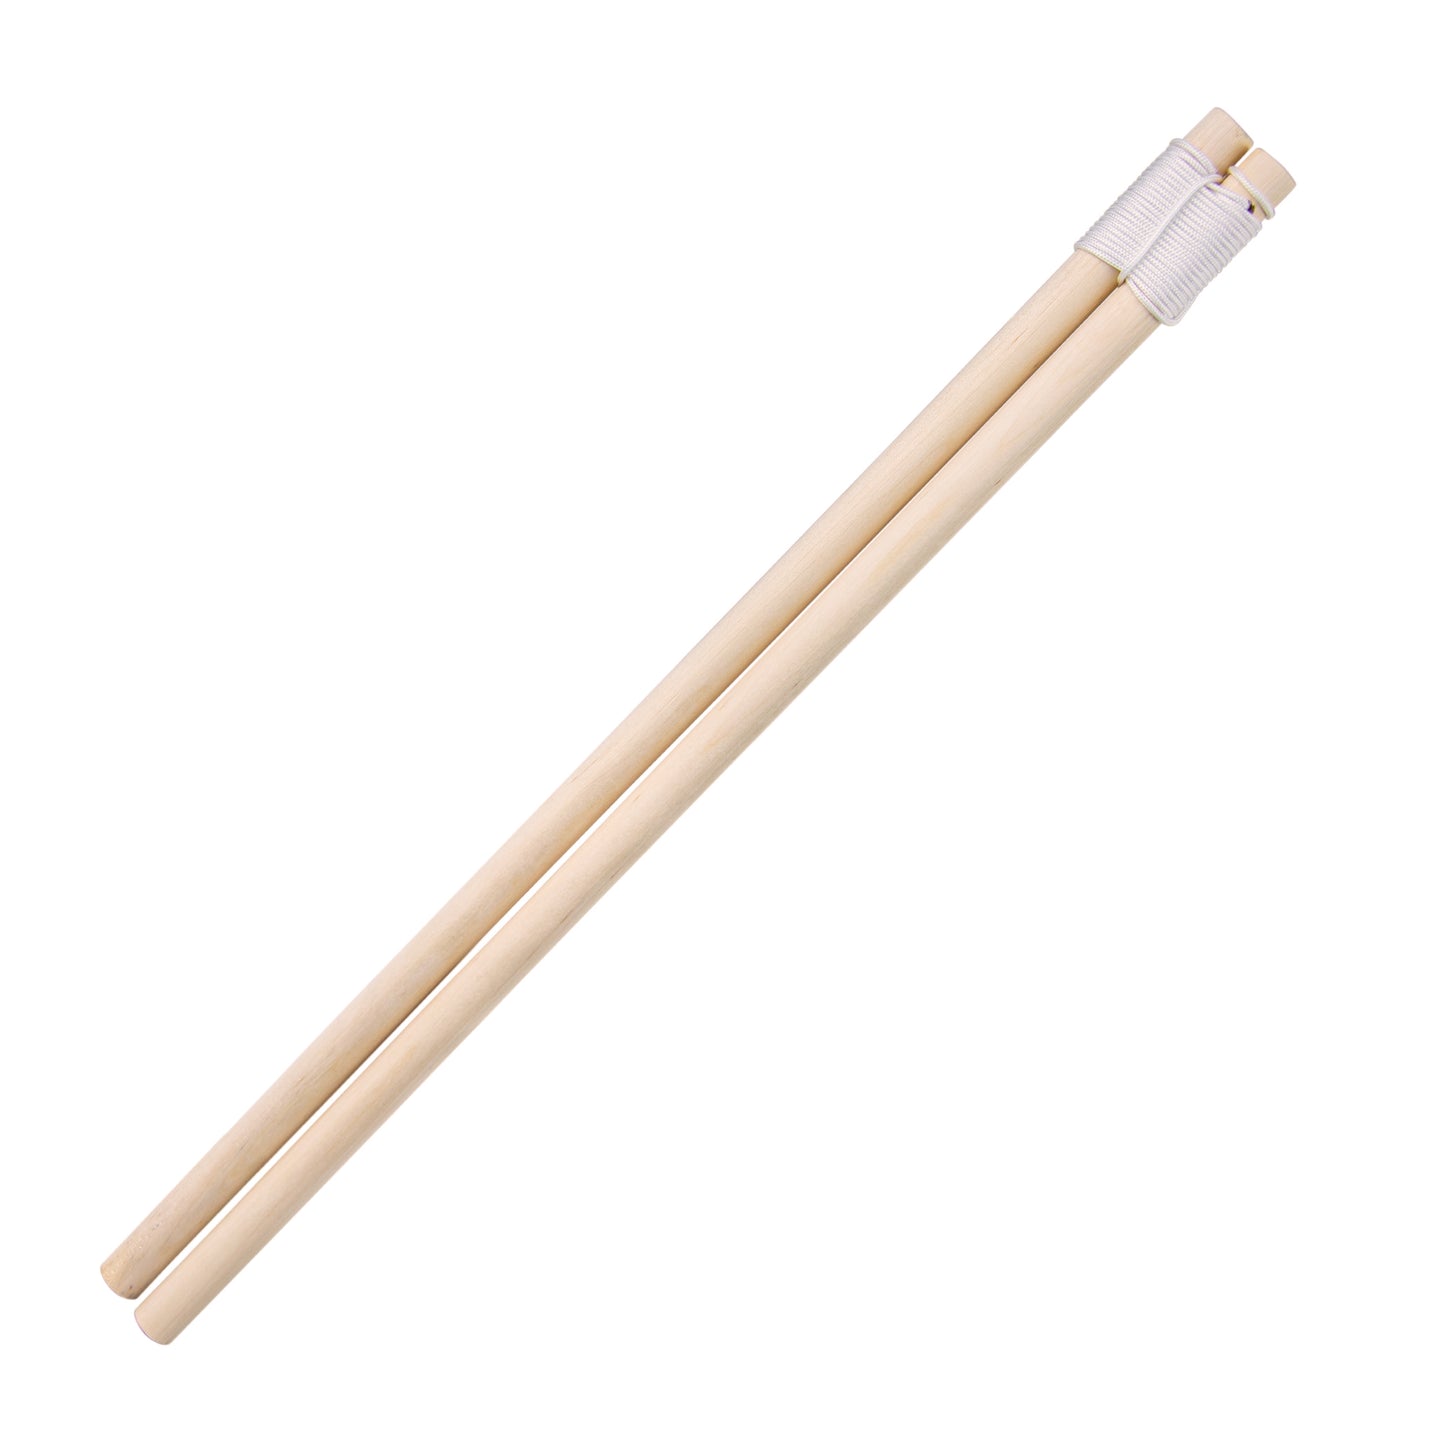 Juggle Dream Basic Wooden Sticks  with white string